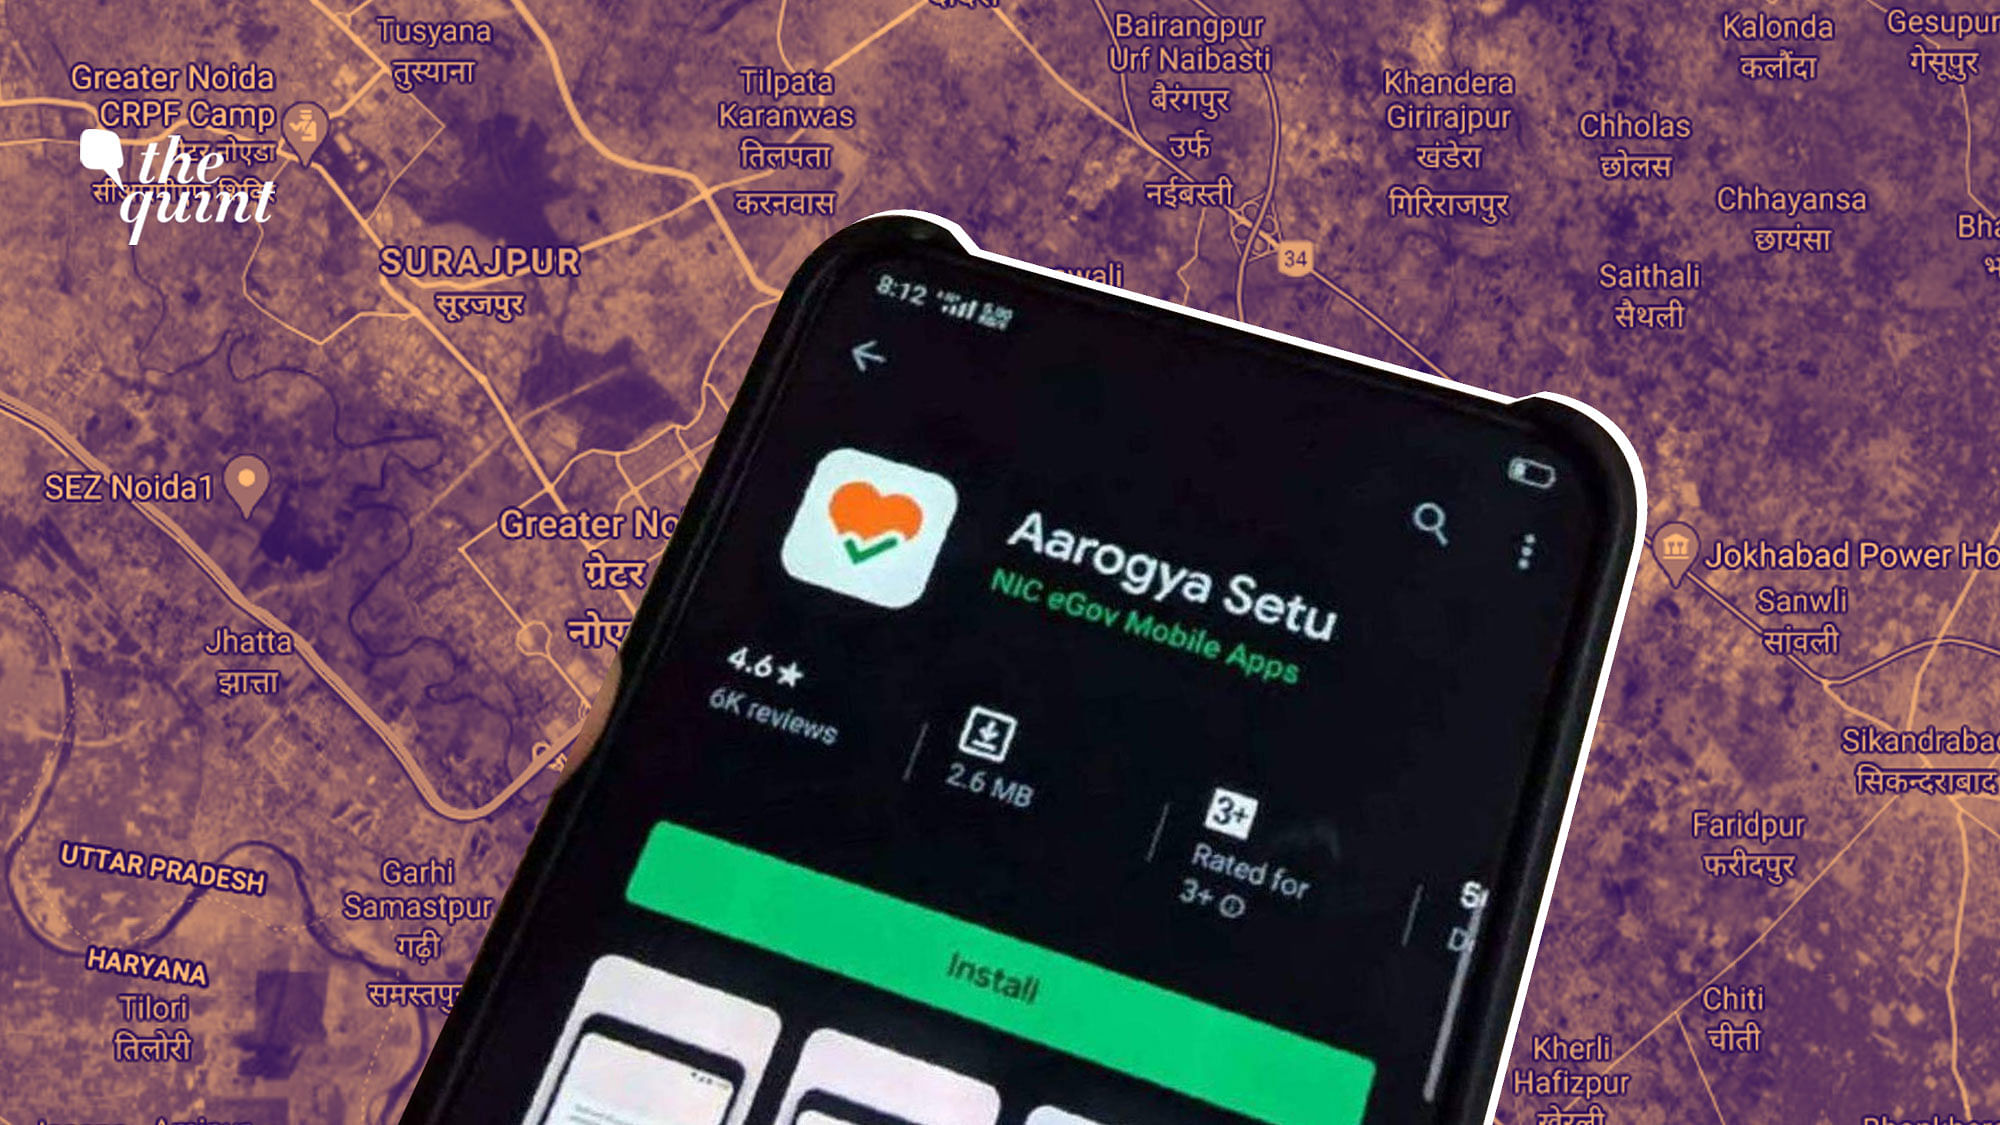 On 26 May, the government officially released the source code for the Android version of Aarogya Setu app.&nbsp;